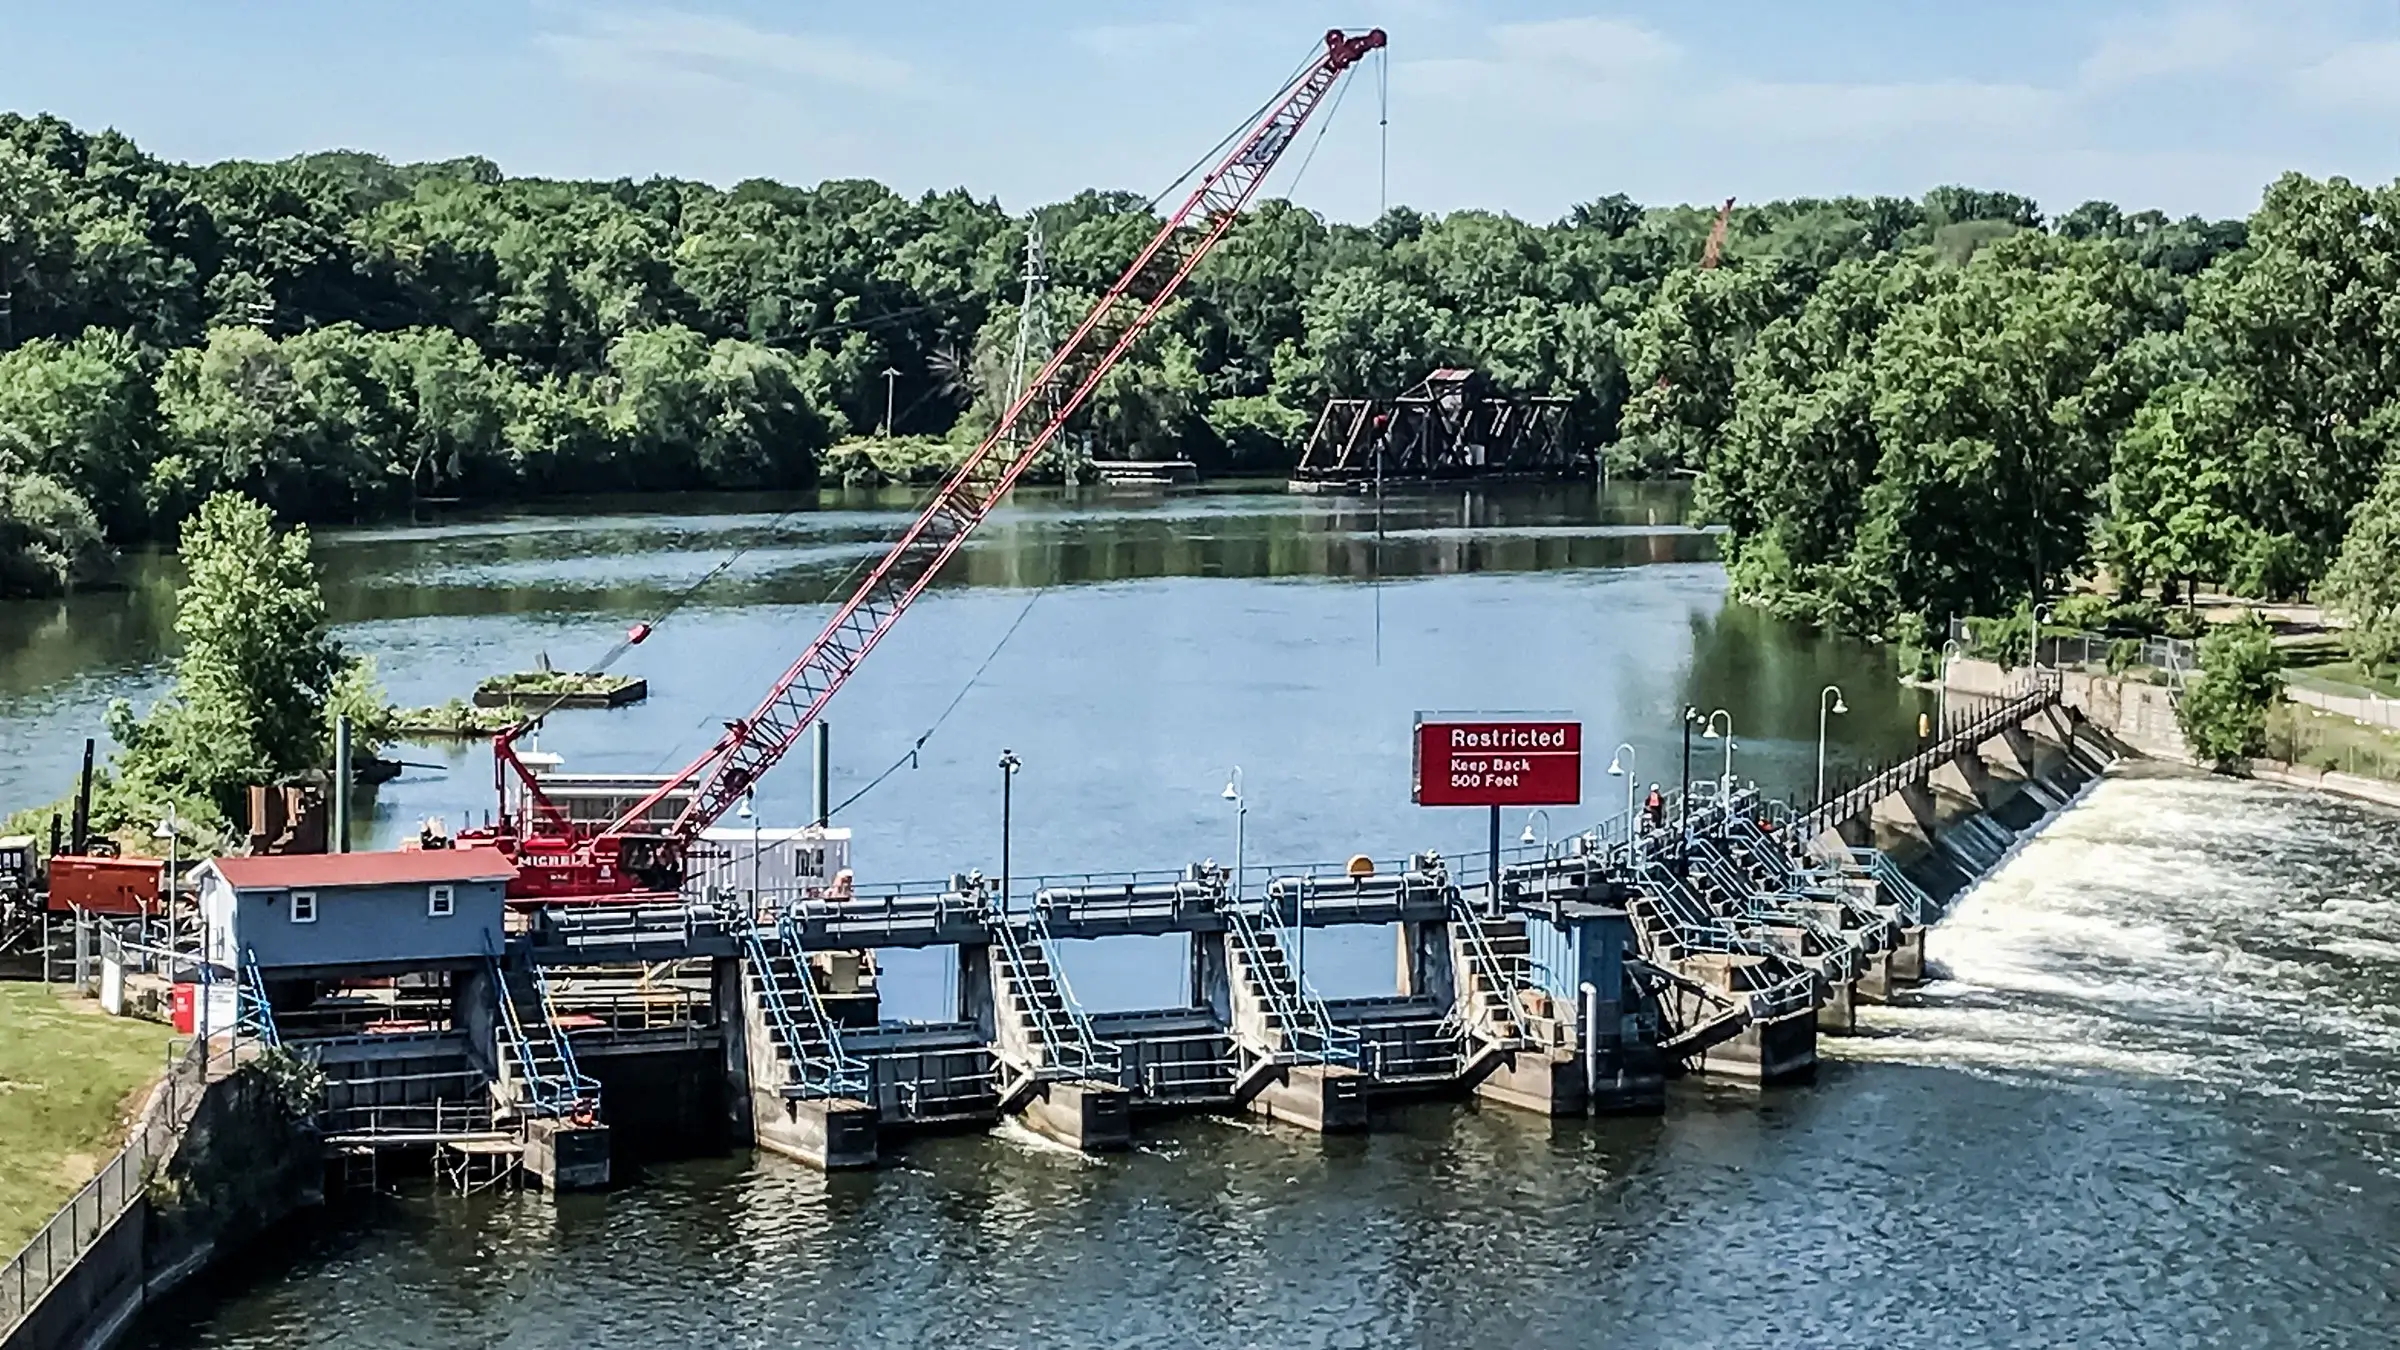 Crane operating over a dam on a sunny day with trees in the background.